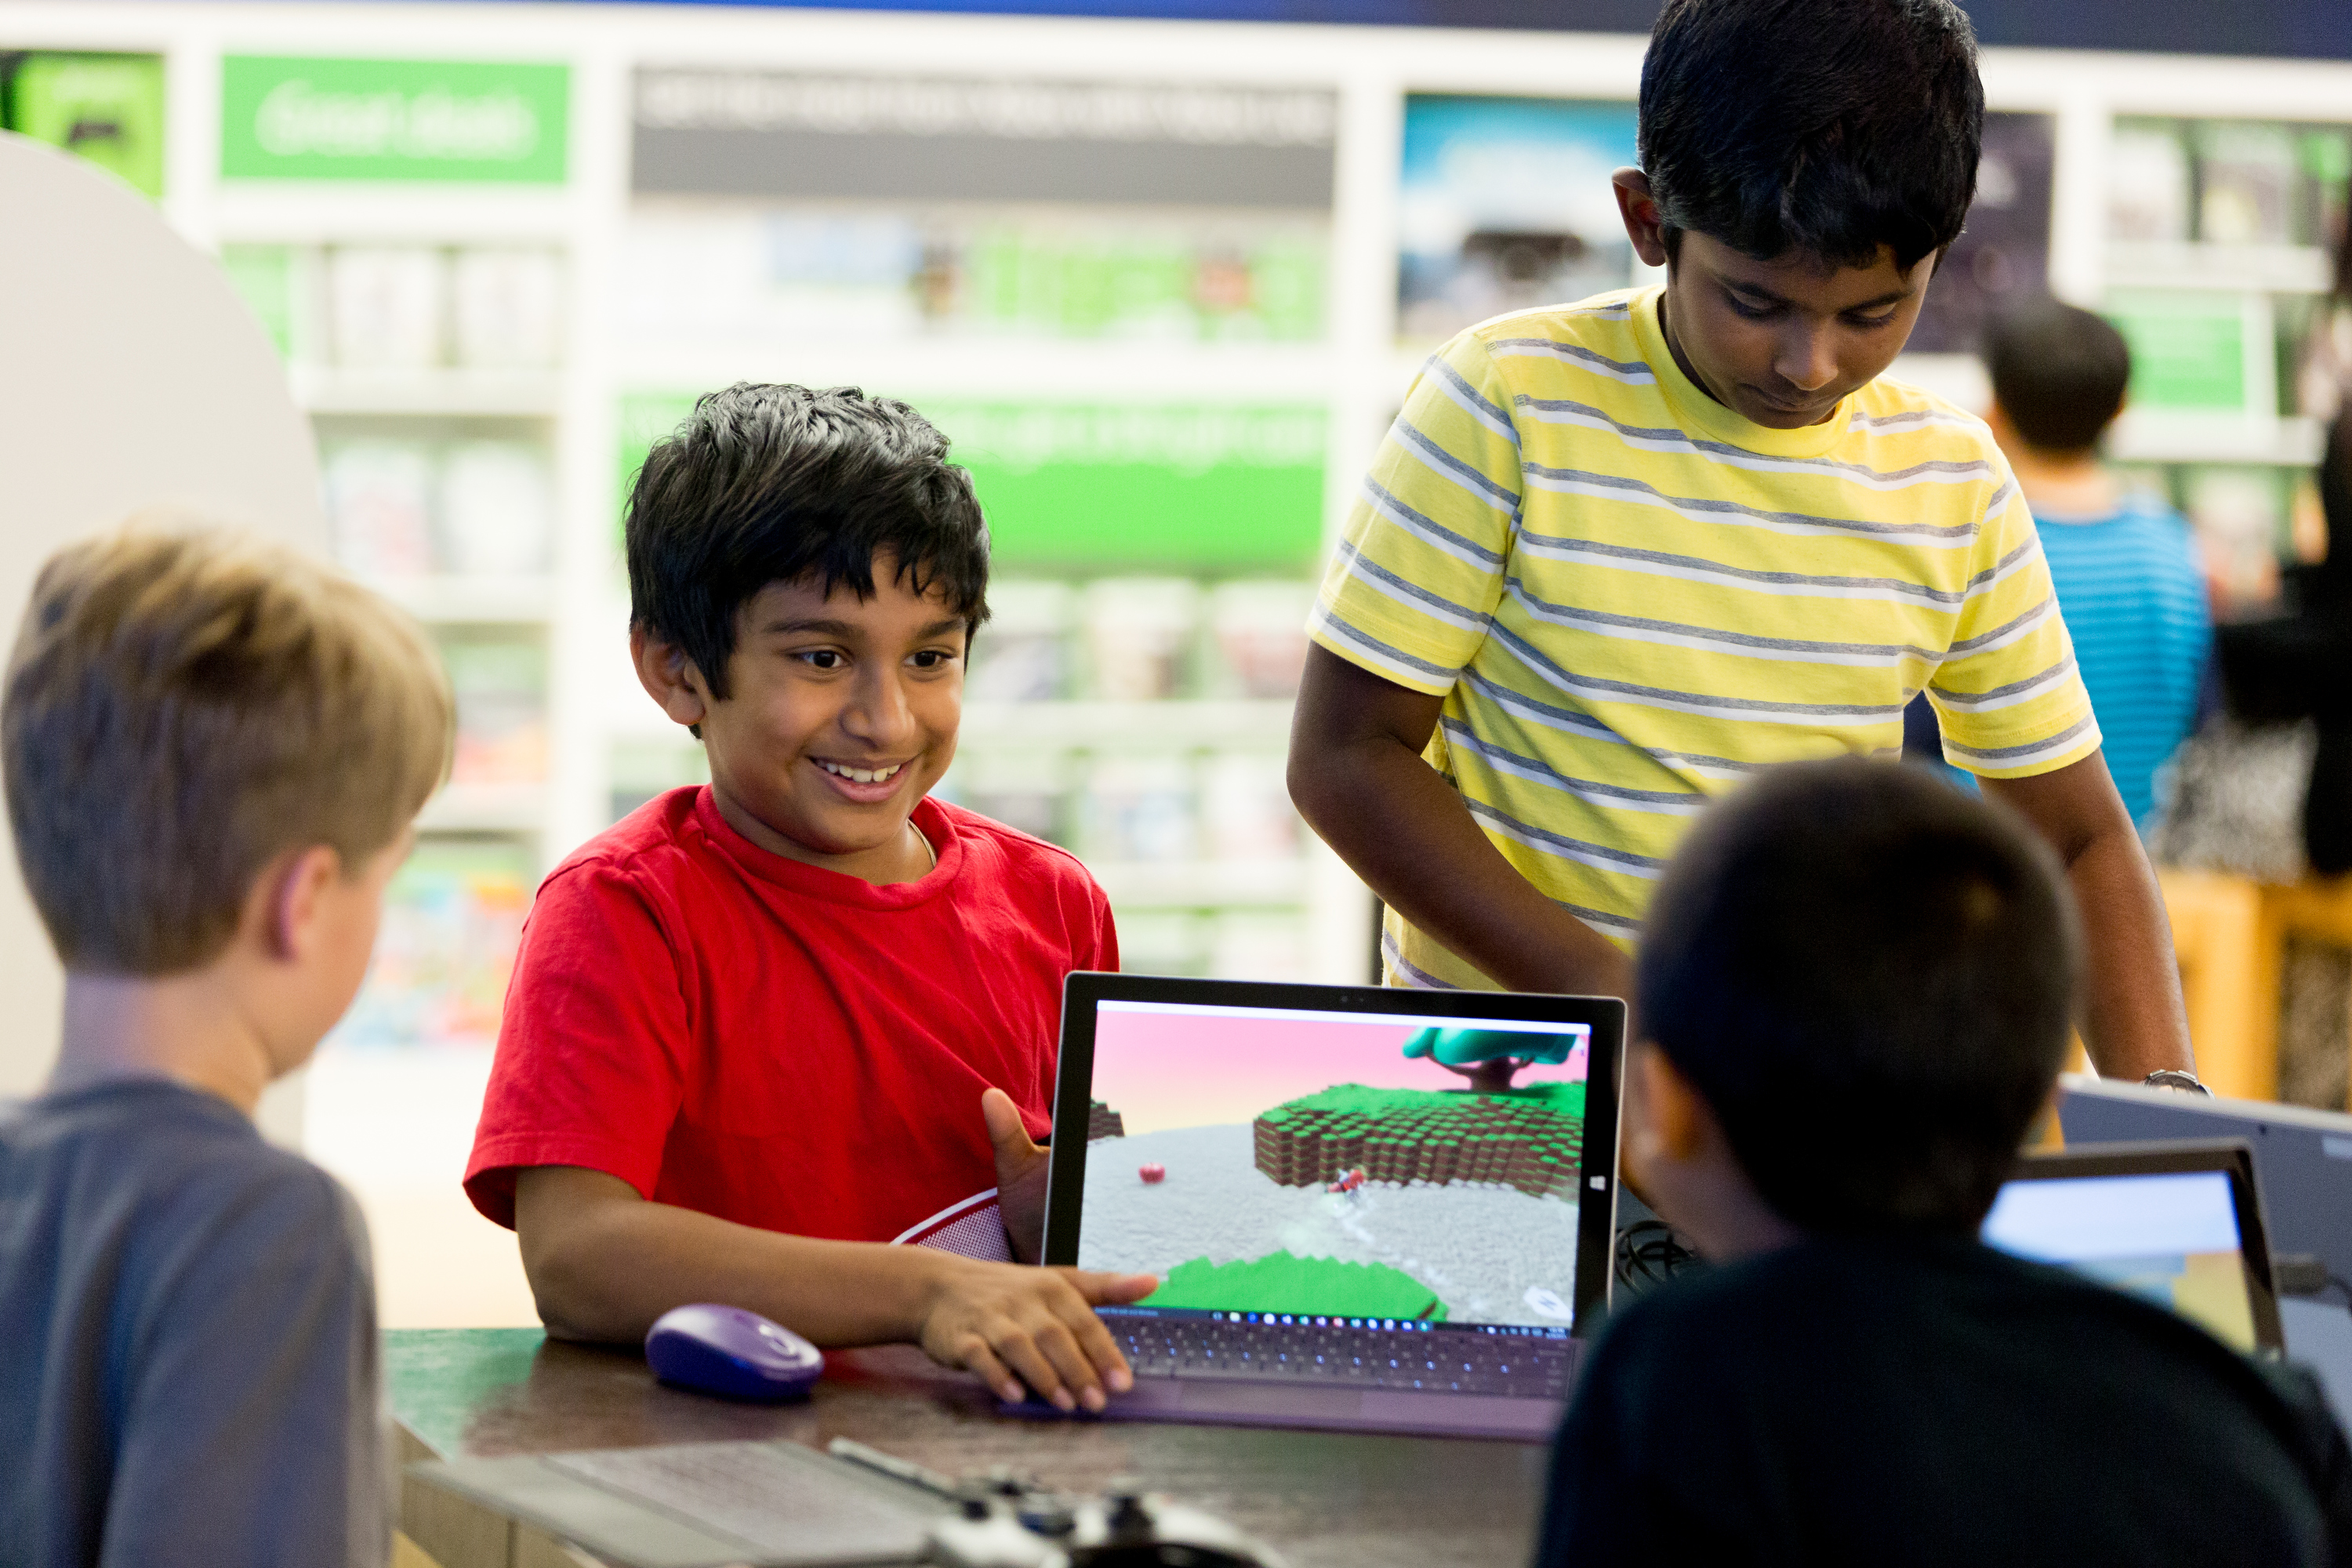 At the YouthSpark Summer Camp at Microsoft at Bellevue Square Mall, Anikait Vishwanathan, 9, is happy with the results of his work; at right, Soathvik Somujayabalan, 9, concentrates on what he’s working on. Photo credit: Scott Eklund, Red Box Pictures.